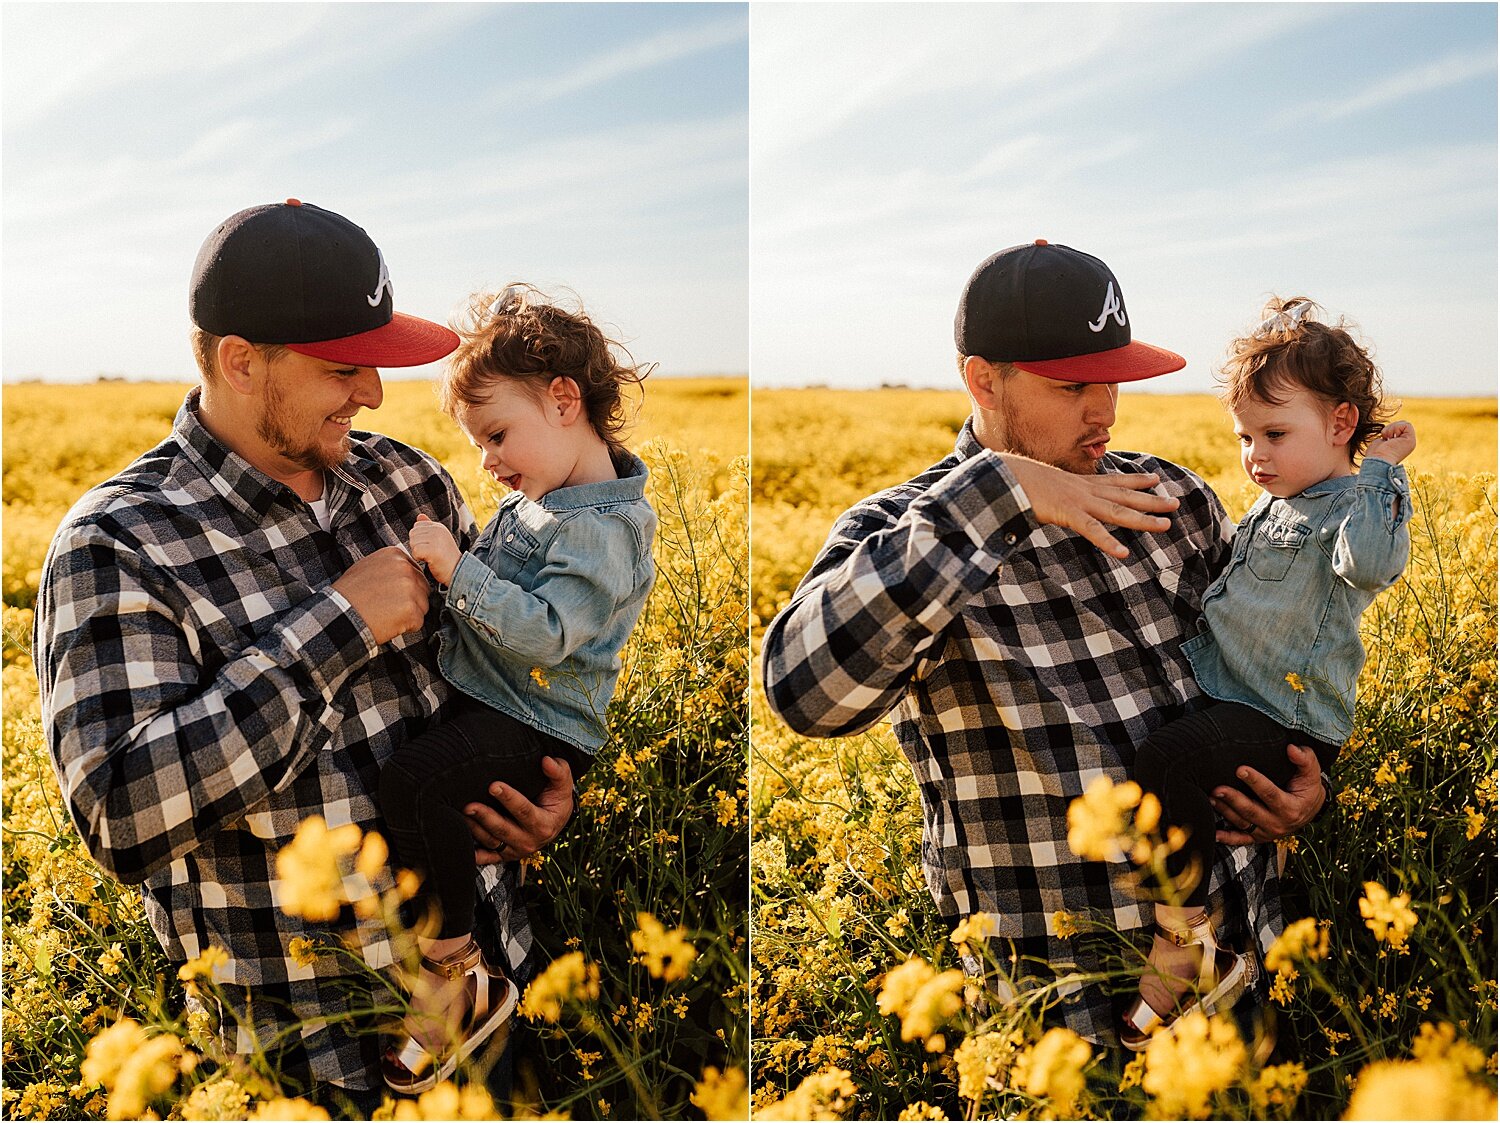 spring field of yellow flowers family session10.jpg